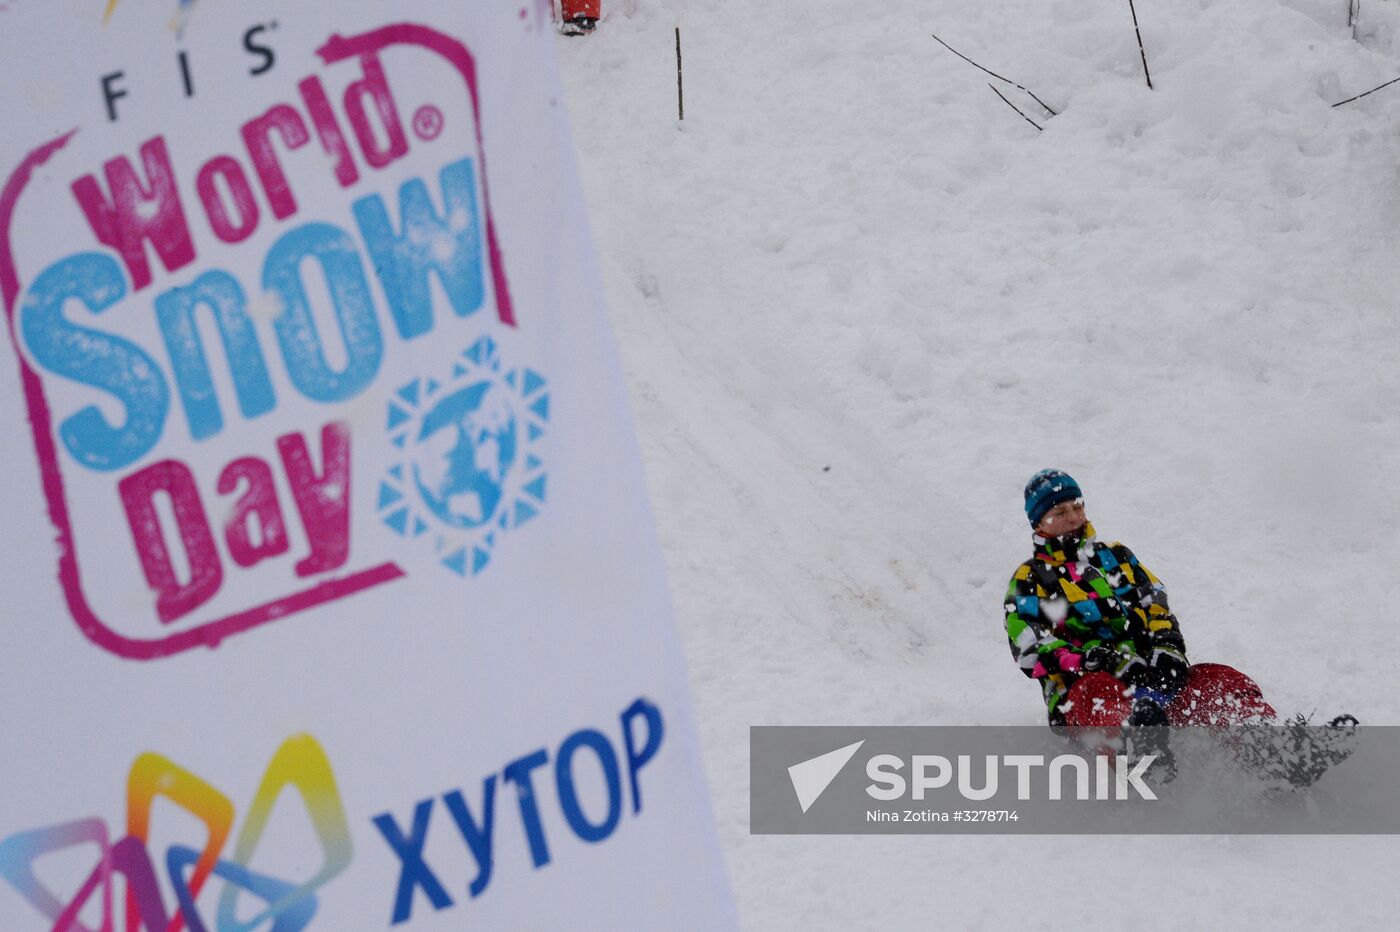 Day of Snow event at alpine resports in Sochi